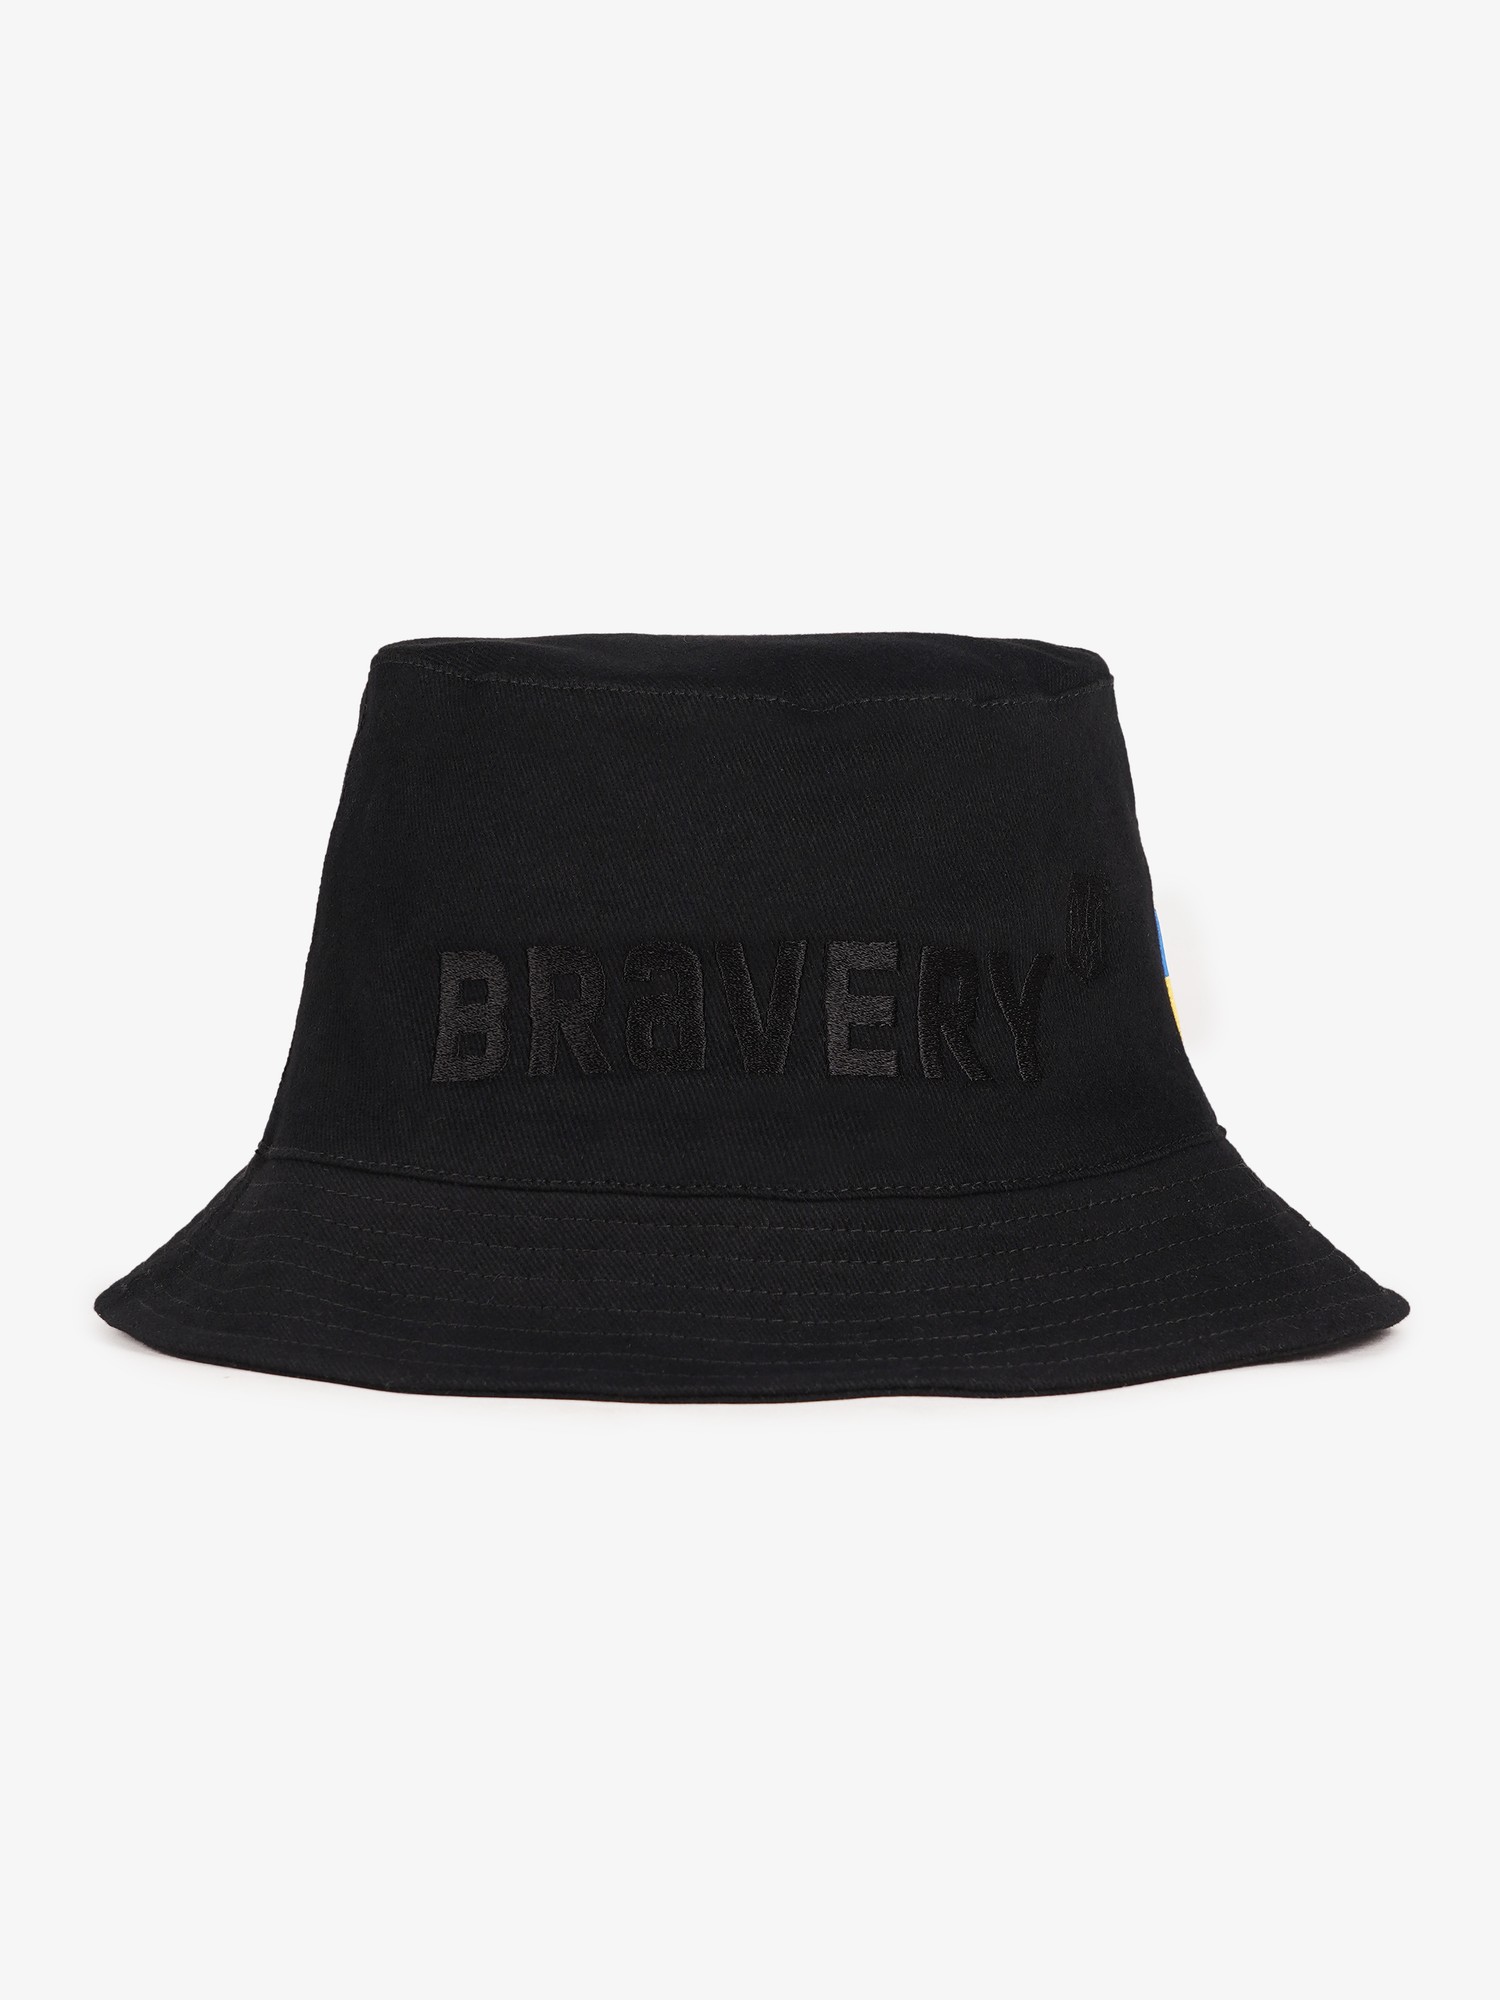 BRAVERY IS IN OUR DNA Black Bucket Hat